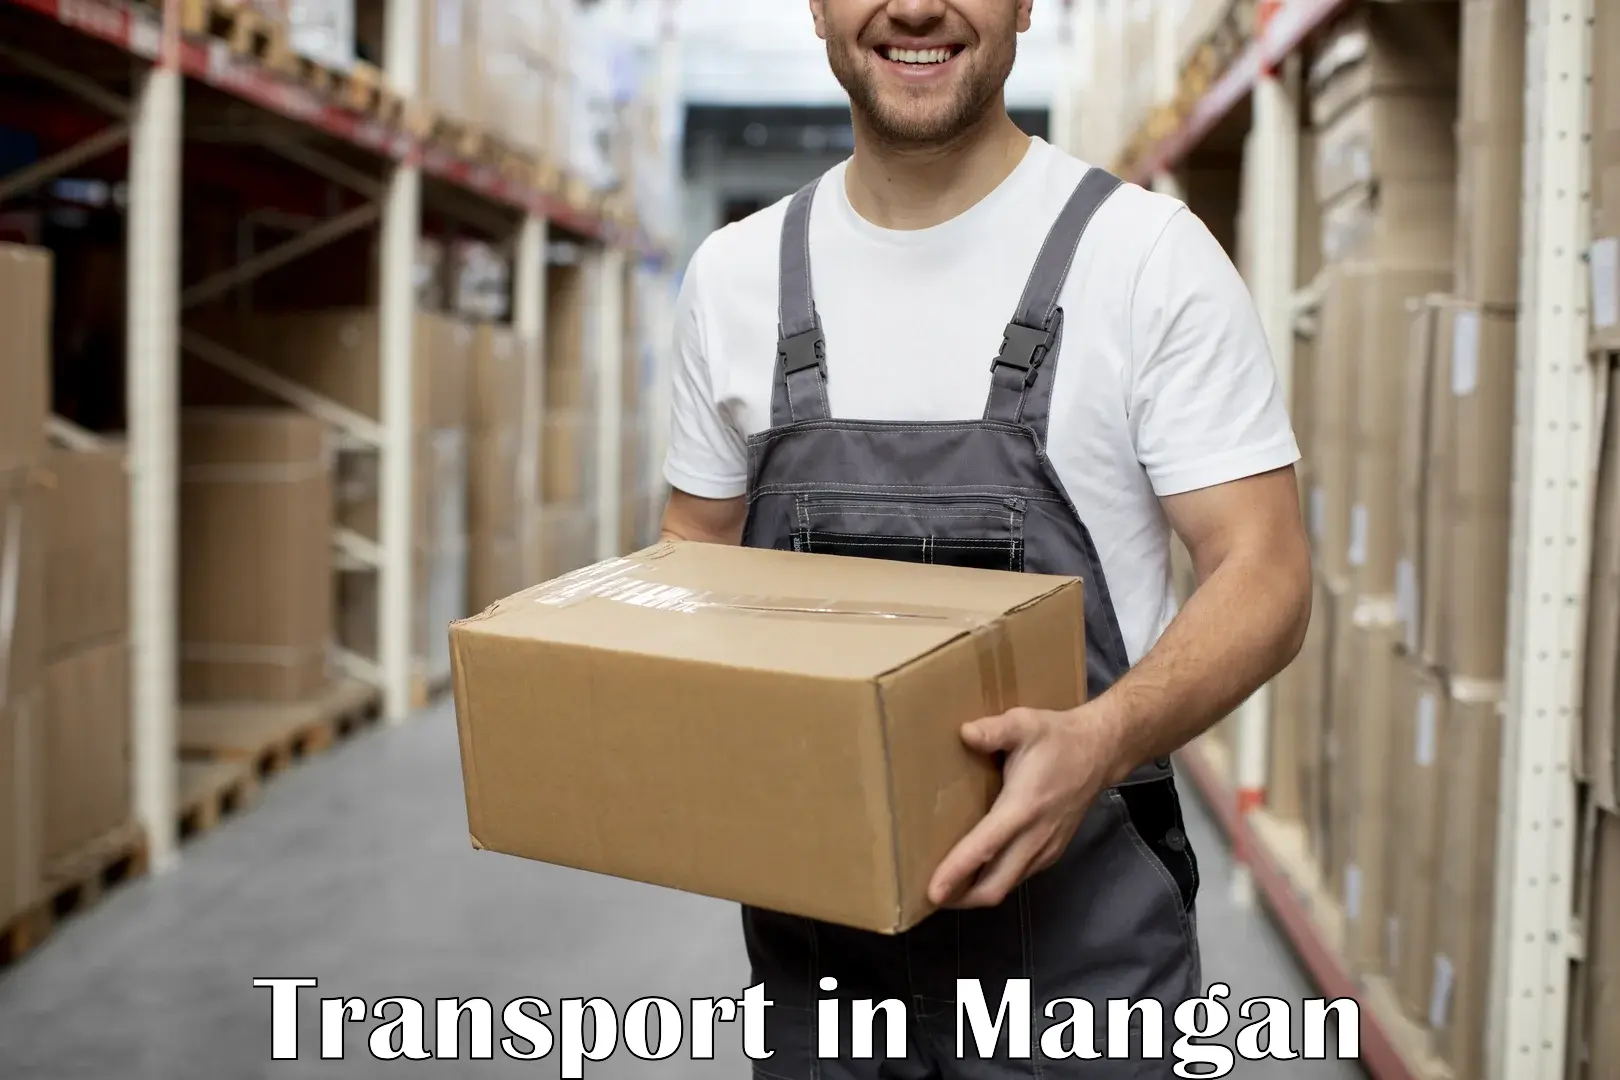 Vehicle transport services in Mangan